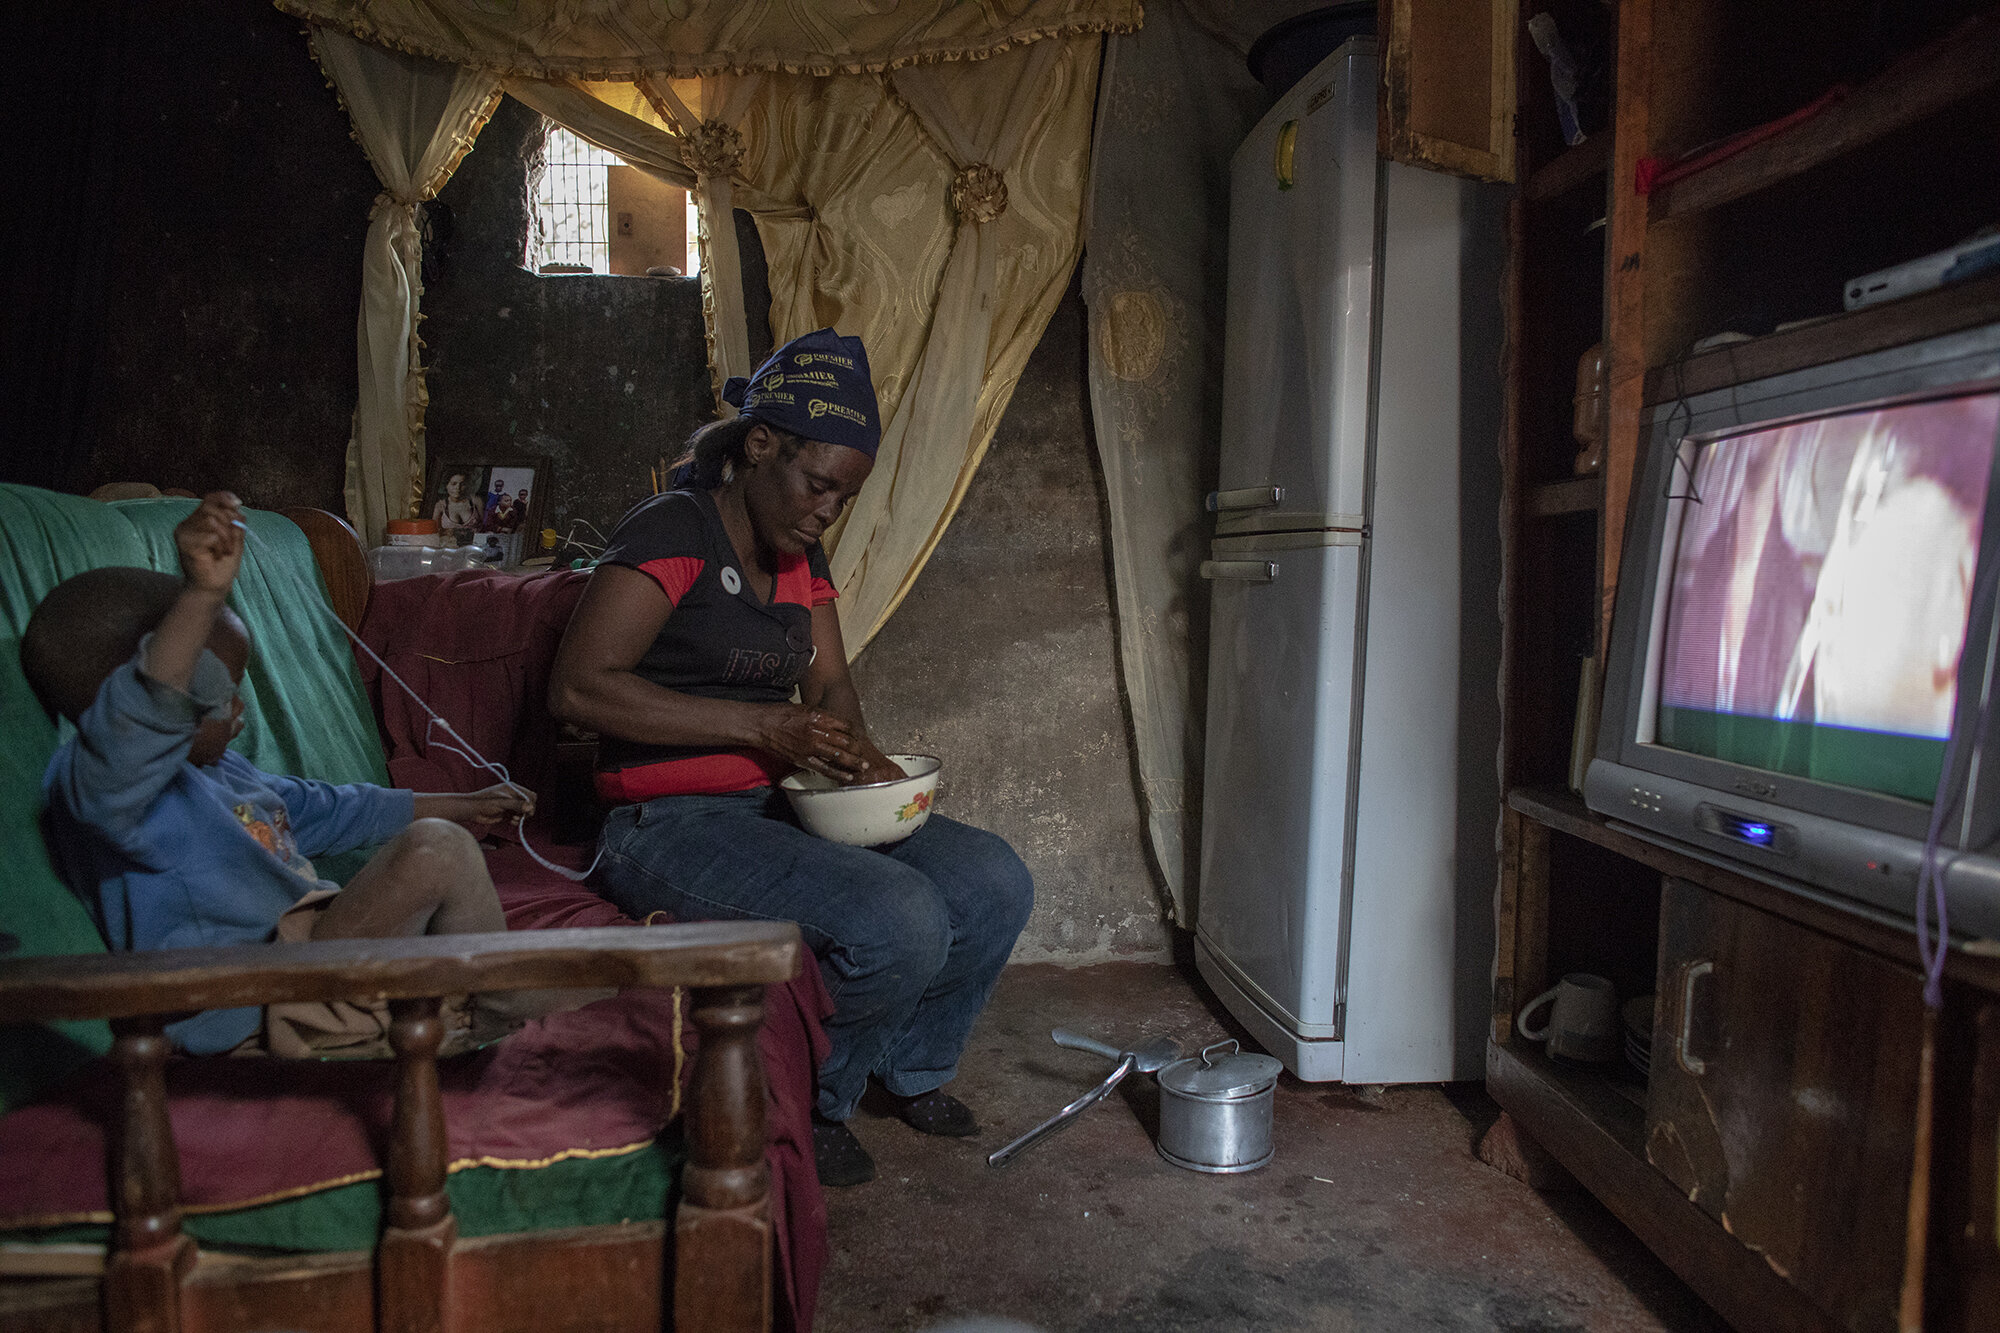  October 21, 2018: Roselyn washes he hands after having dinner at home while watching TV with her son Brendon in their one-roomed house on the farm compound.  